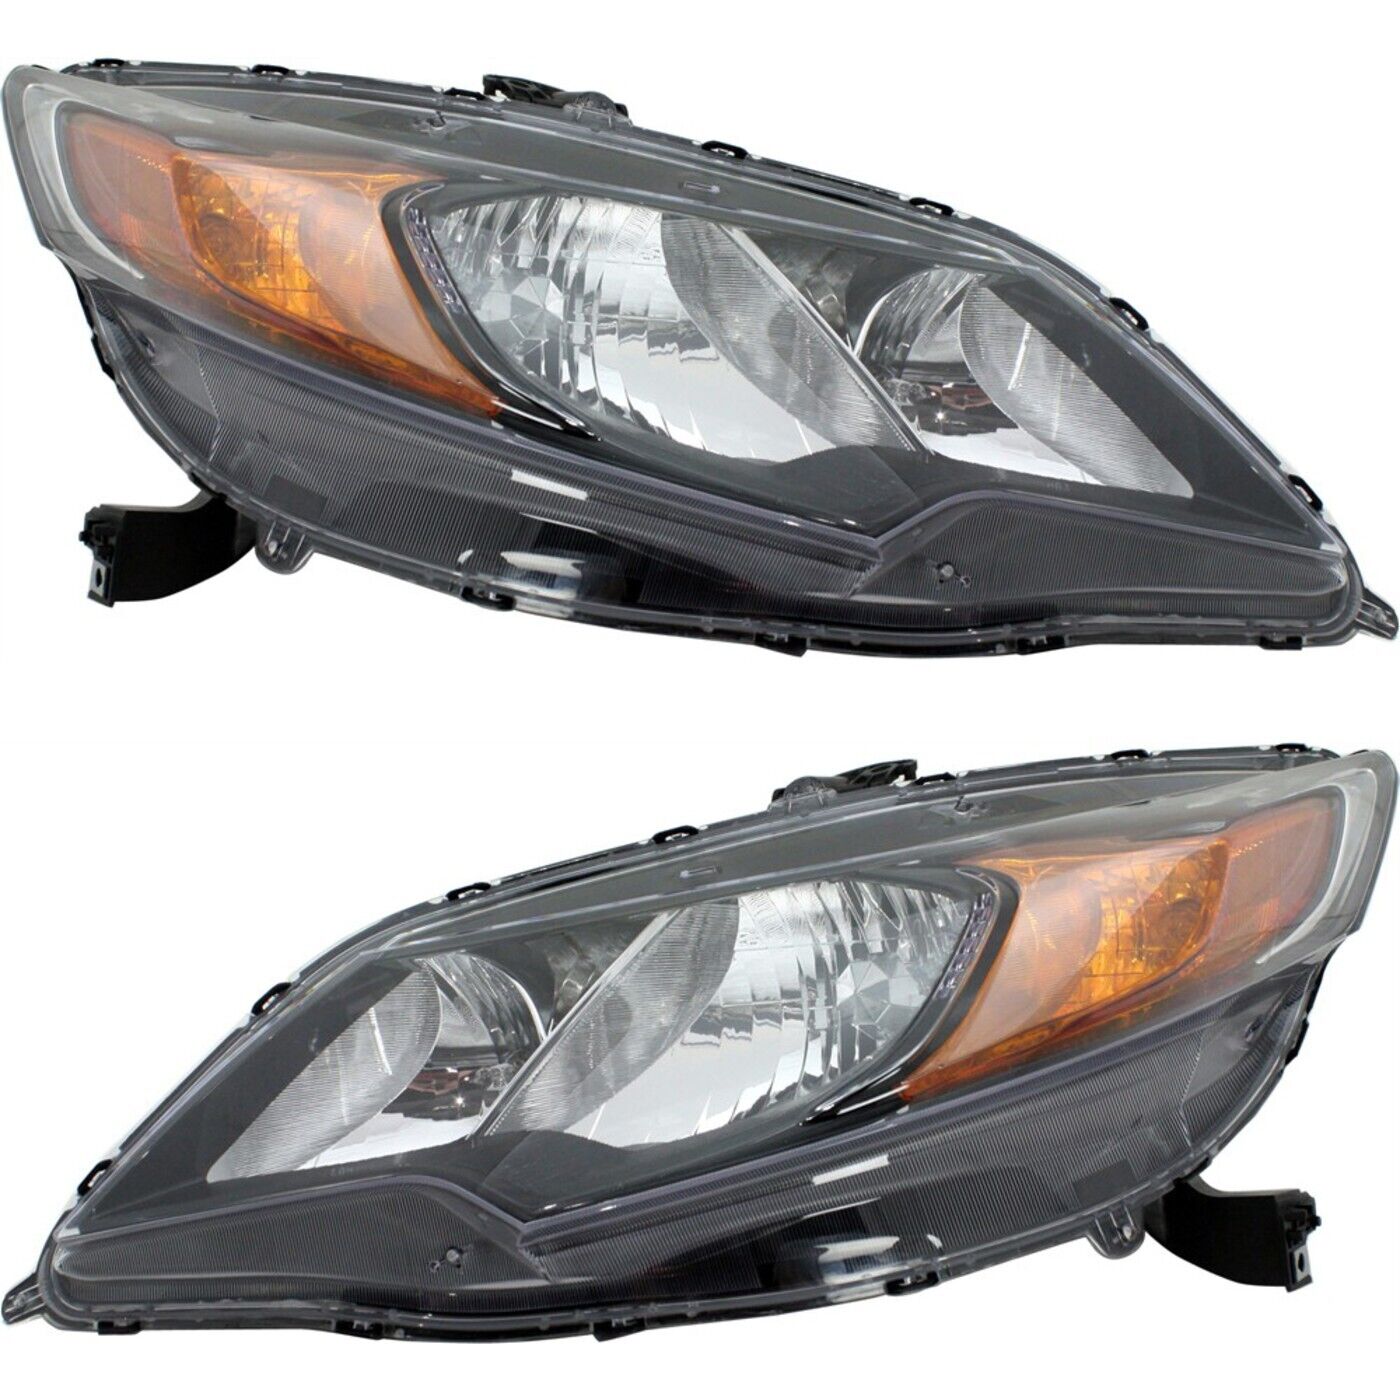 Headlight Set For 2014-2015 Honda Civic Coupe Left and Right With Bulb 2Pc